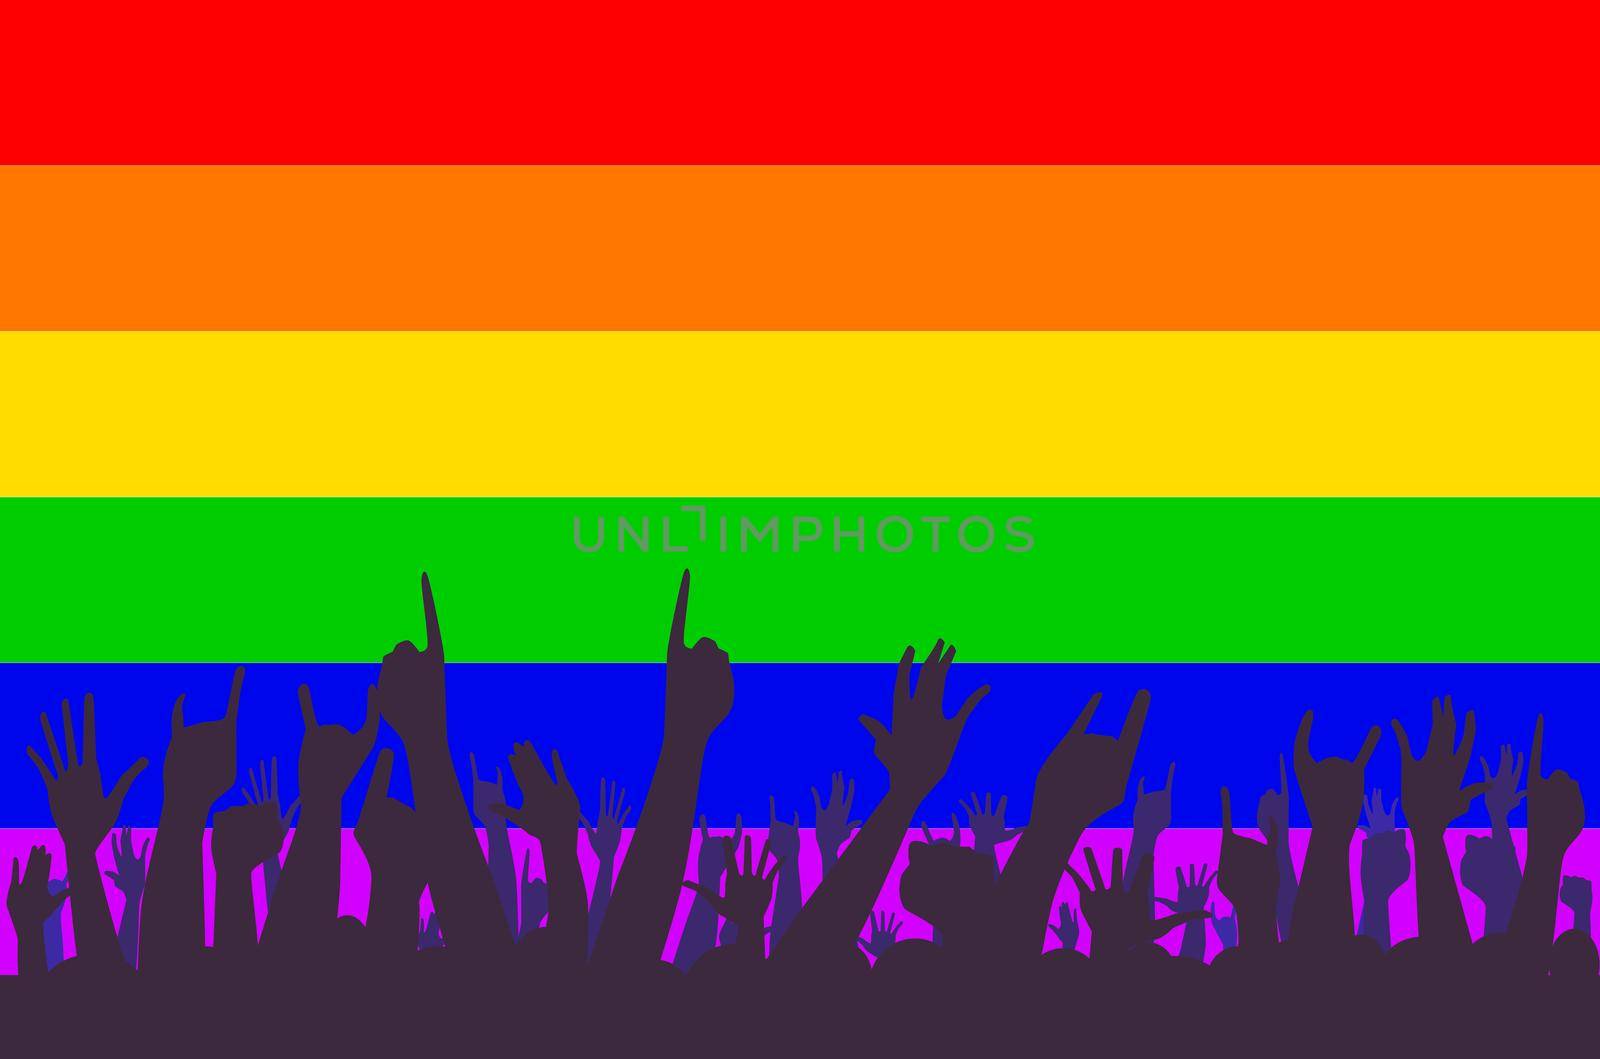 The LGBT Trangender flag in the traditional rainbow colors with waving hands in silhouette on the foreground